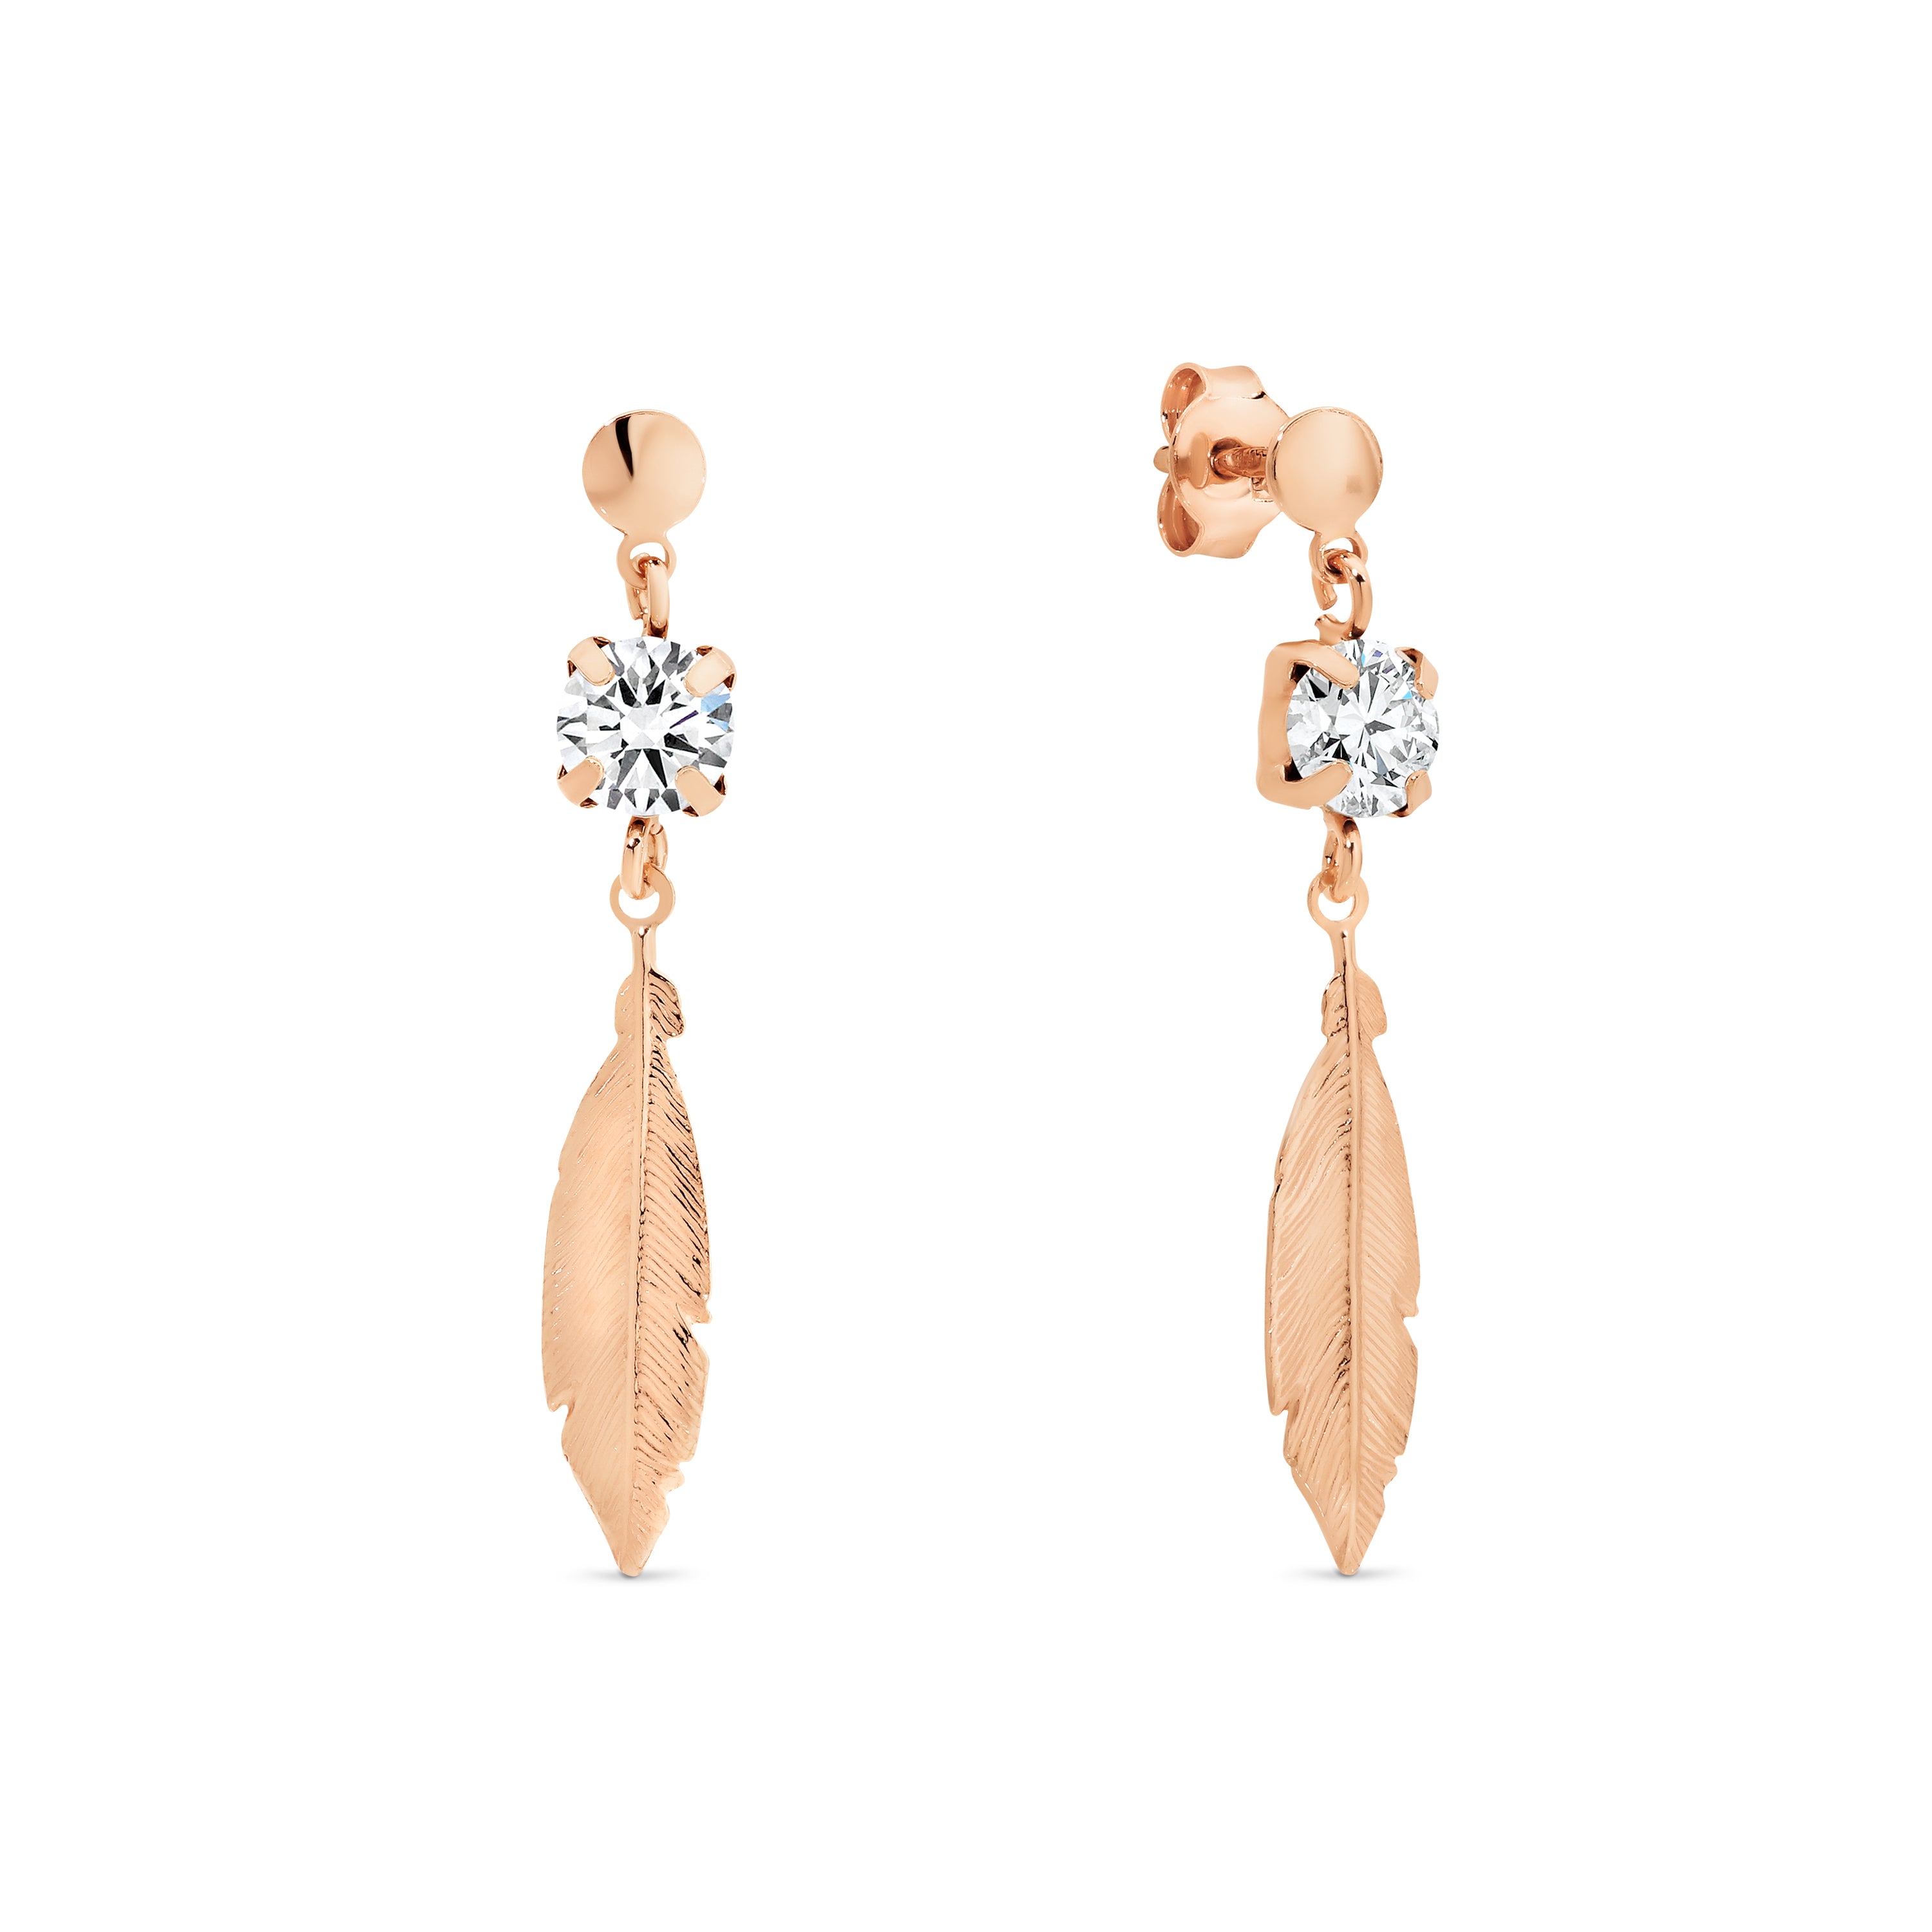 Sterling Silver Rose Gold Plated Feather Stud Earrings, by Davvero with Crystals from Swarovski®